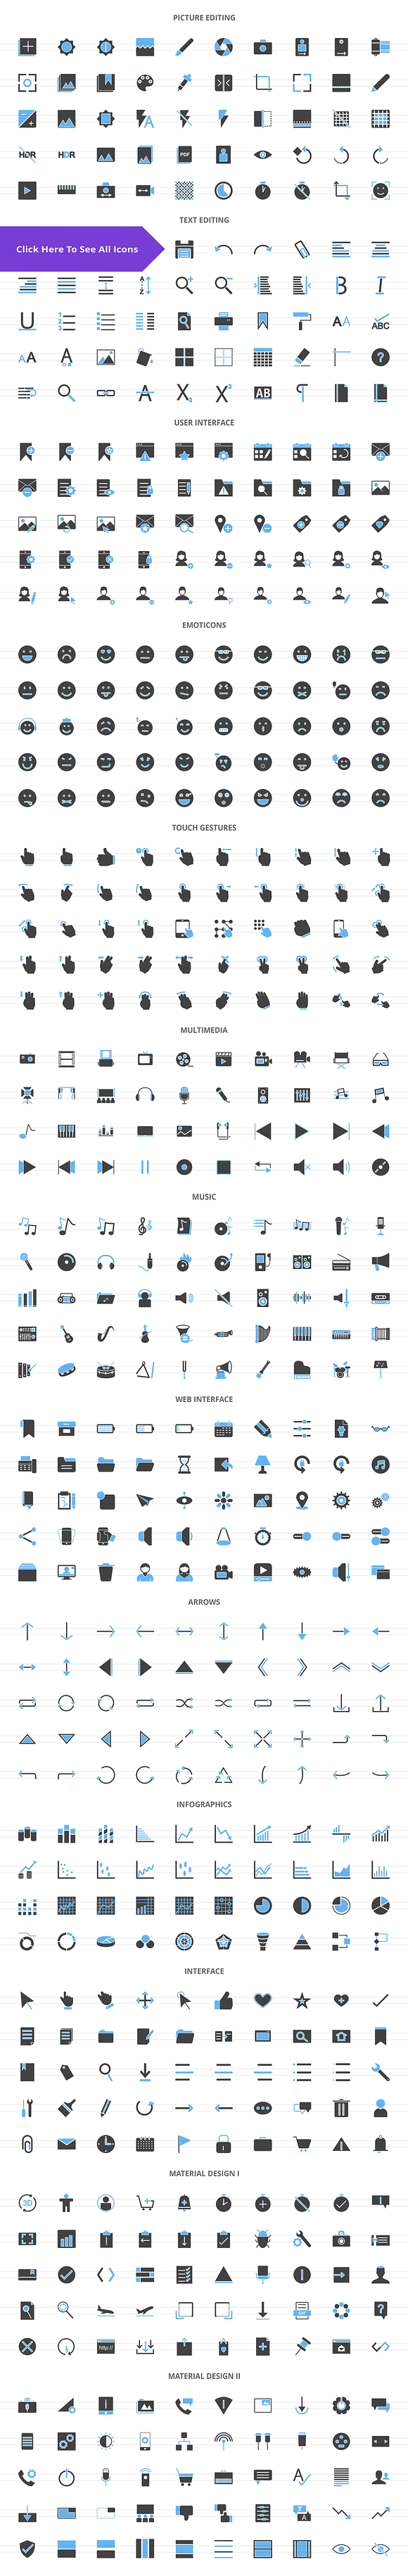 1779 Digital Filled Icons in Graphics - product preview 1